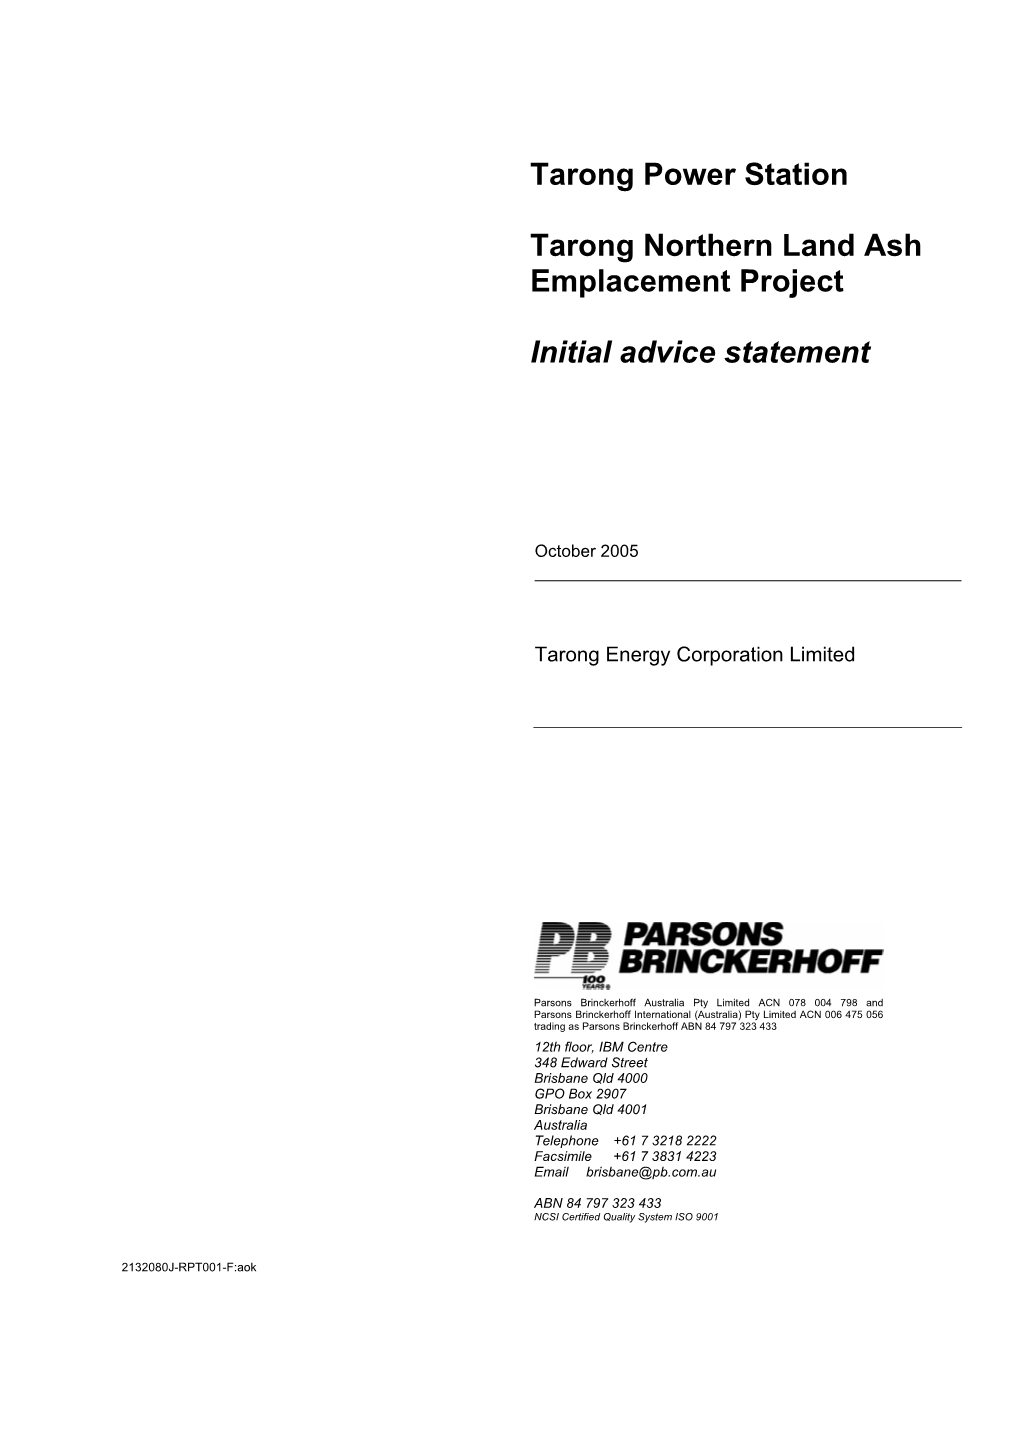 Tarong Northern Land Ash Emplacement Project Initial Advice Statement Contents